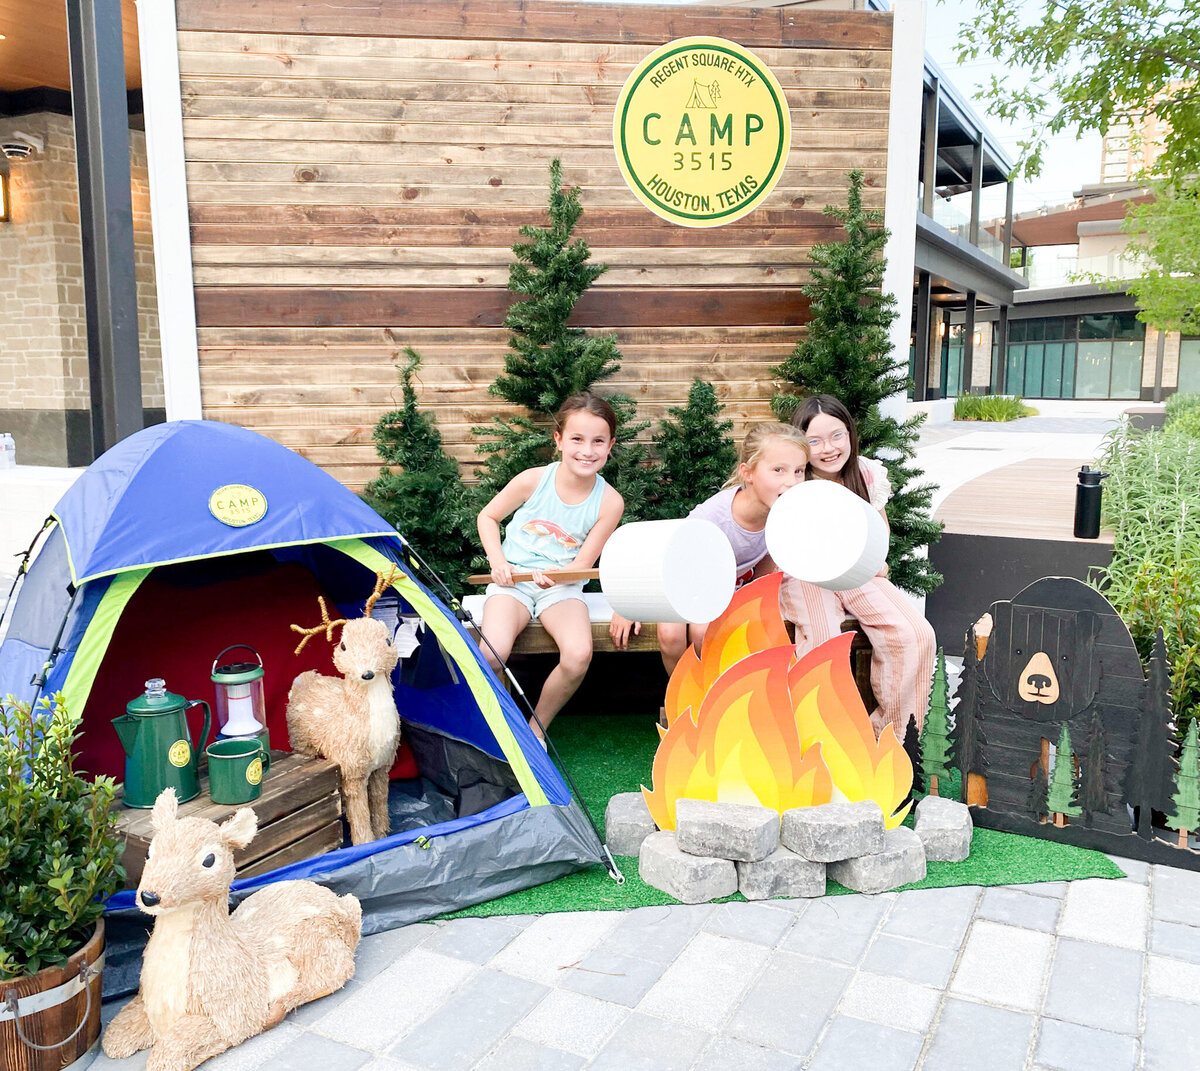 Kids posing in a camping outdoor themed corporate event backdrop design